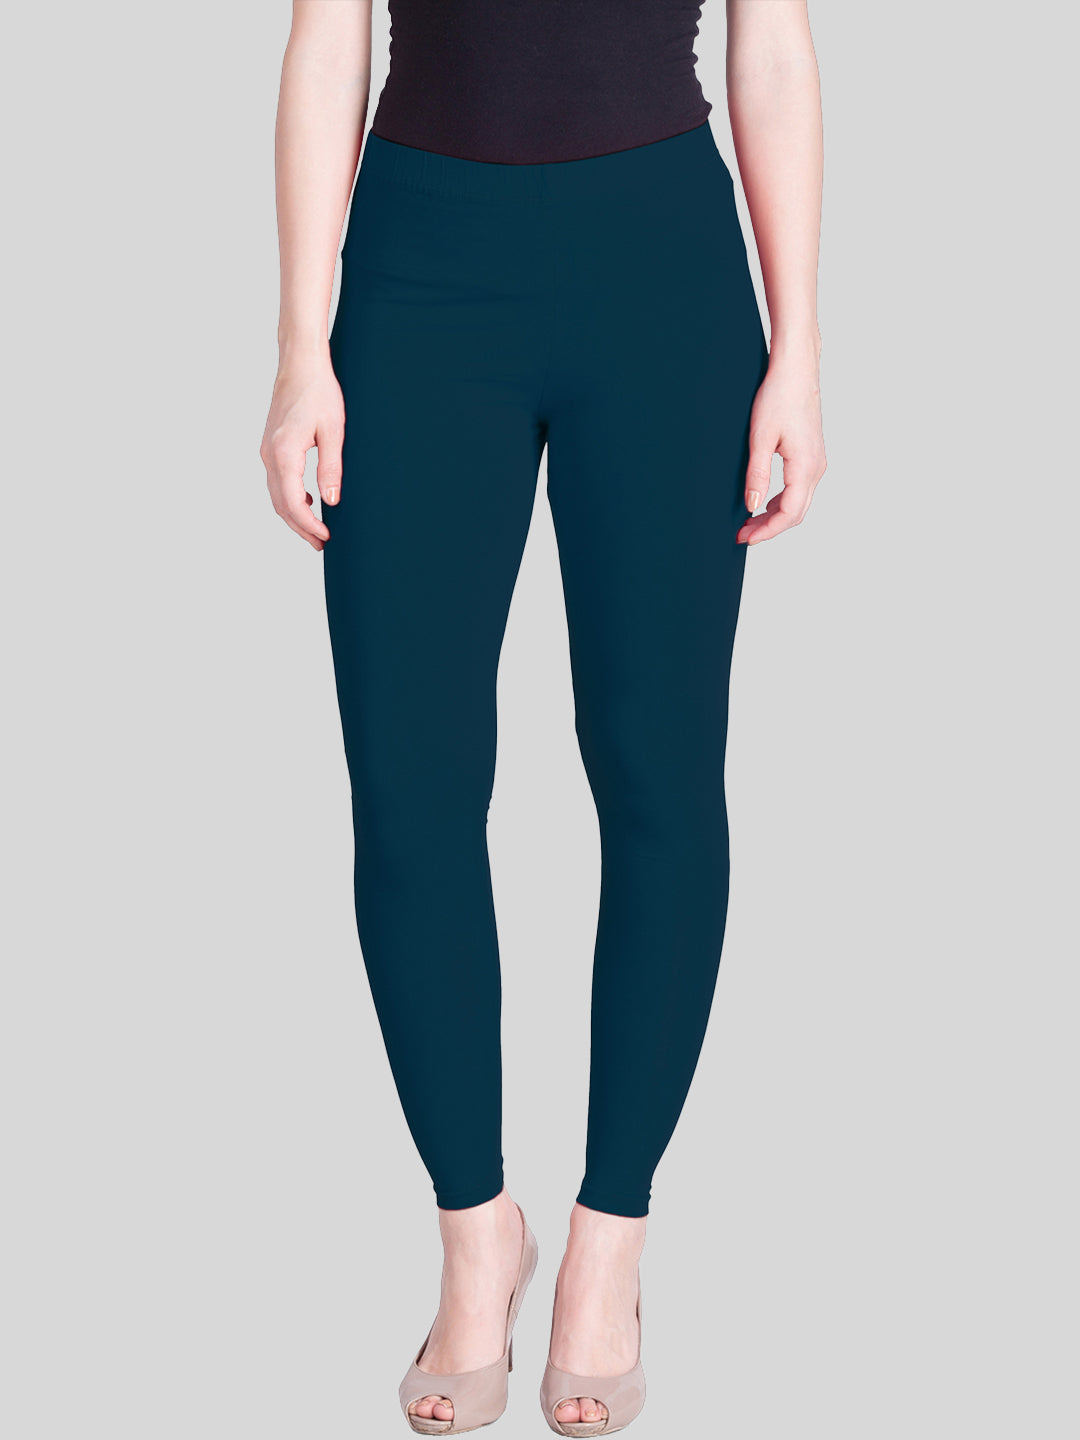 N I S H - LUX Lyra Leggings Available in 100+ colours